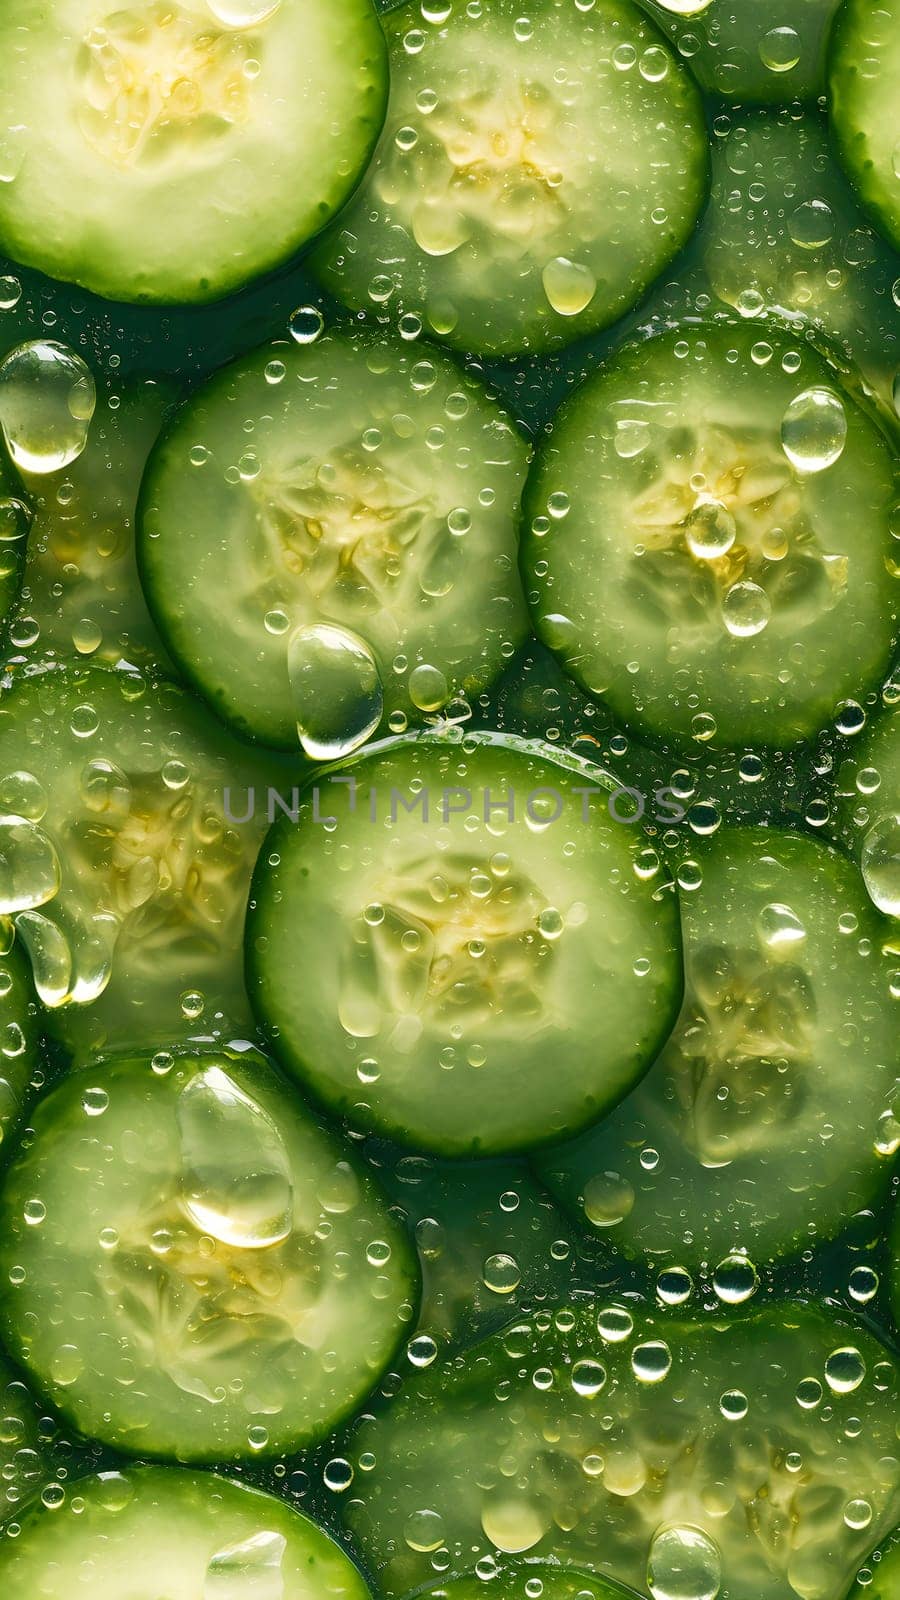 seamless background and texture of sliced cucumbers with drops of water, neural network generated image by z1b